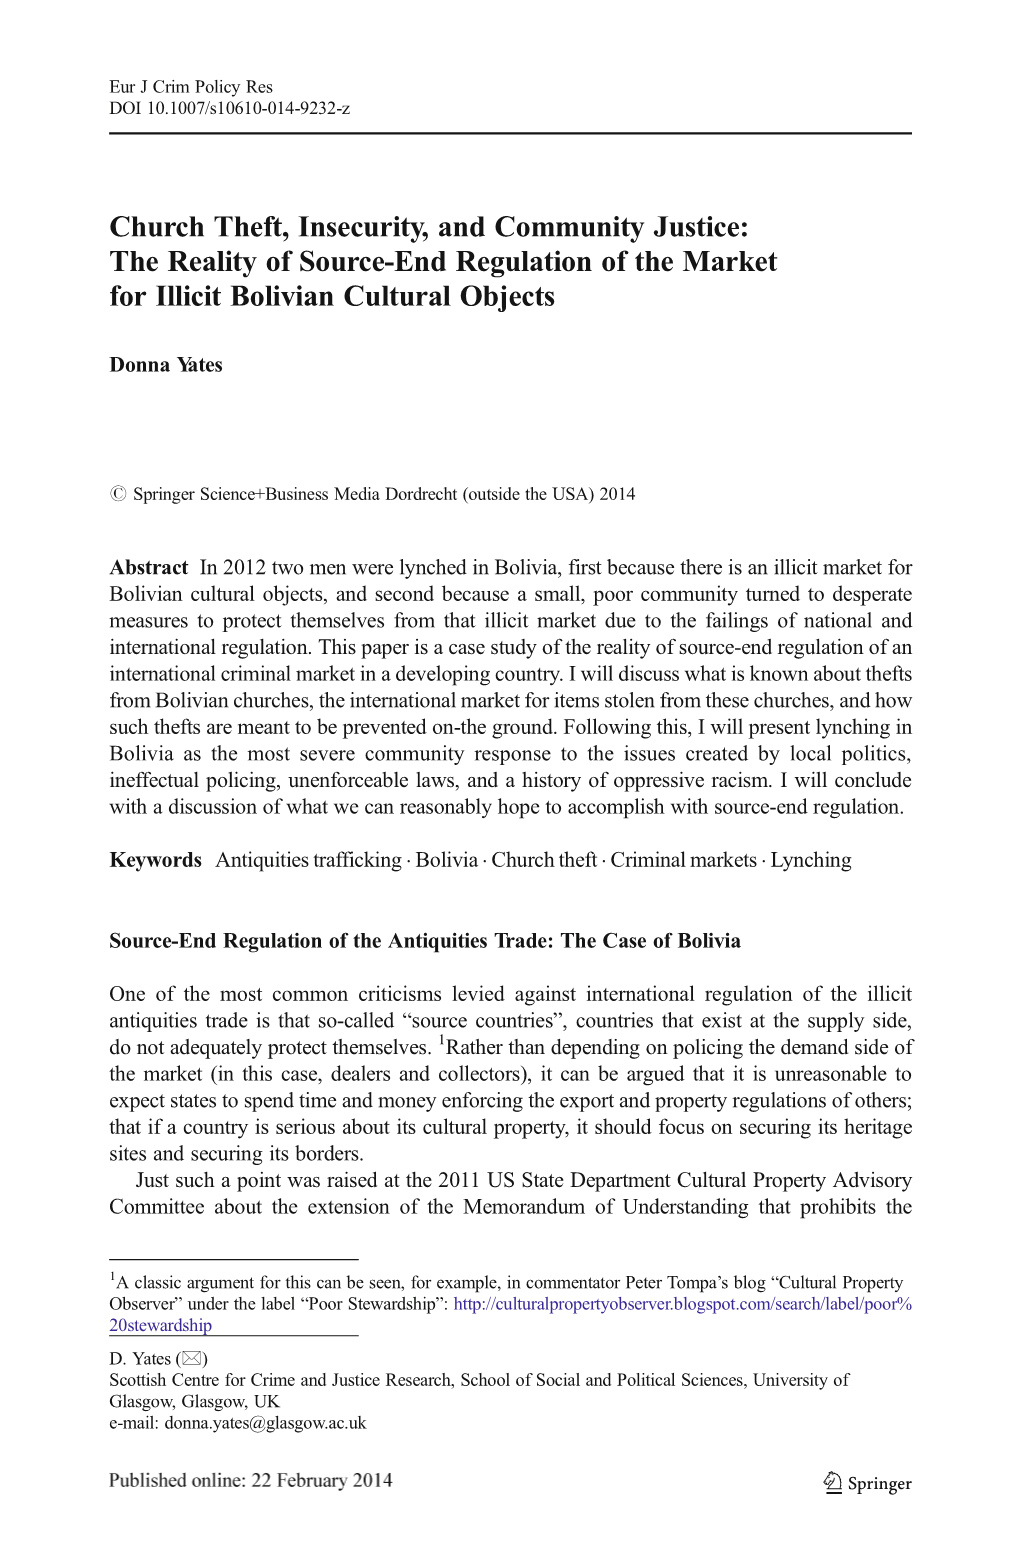 The Reality of Source-End Regulation of the Market for Illicit Bolivian Cultural Objects